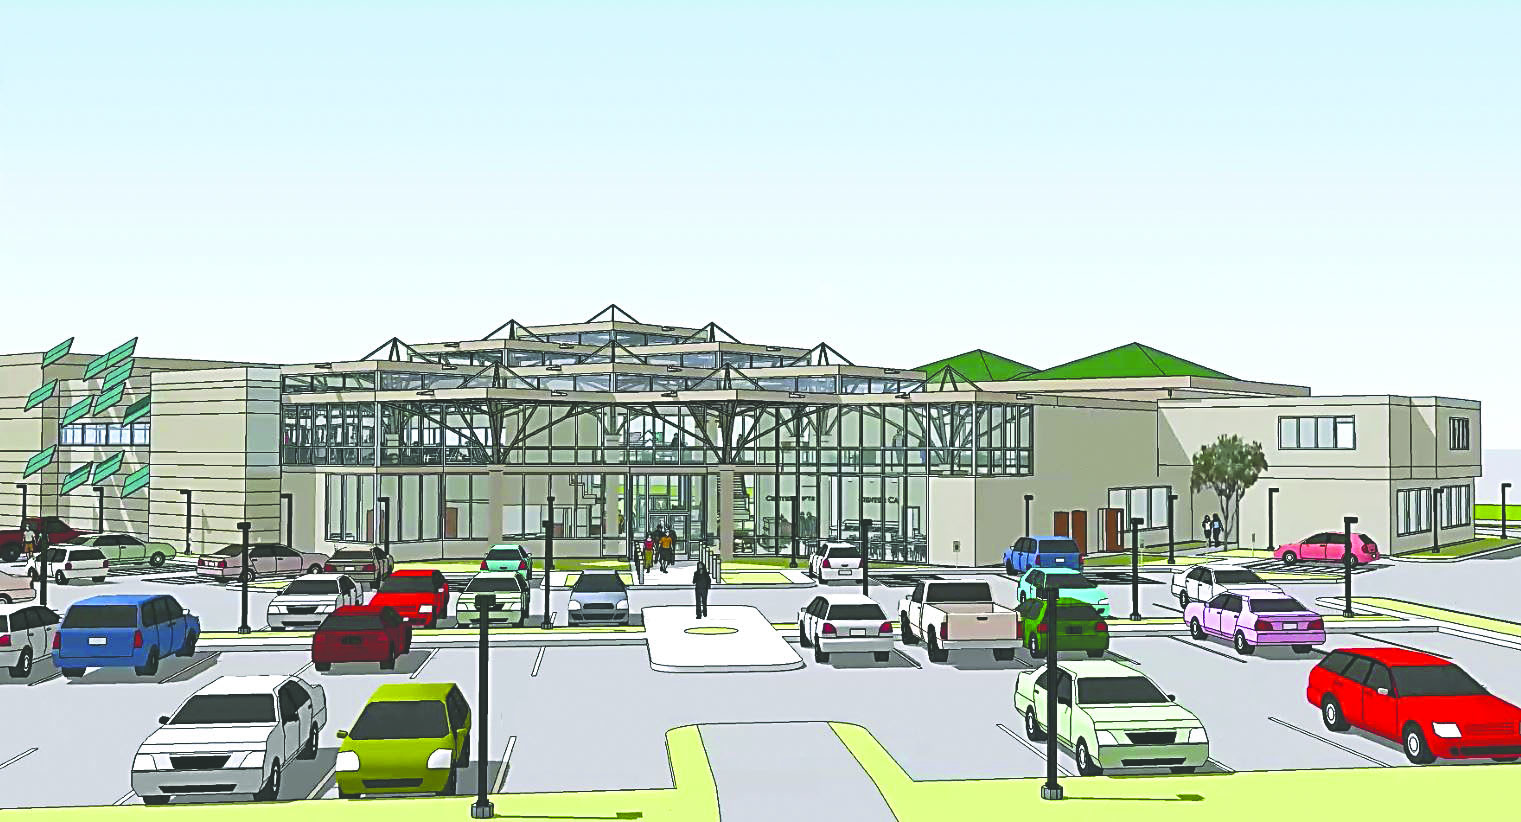 The south entrance of a proposed new $10.4 million building for the Shipley Center